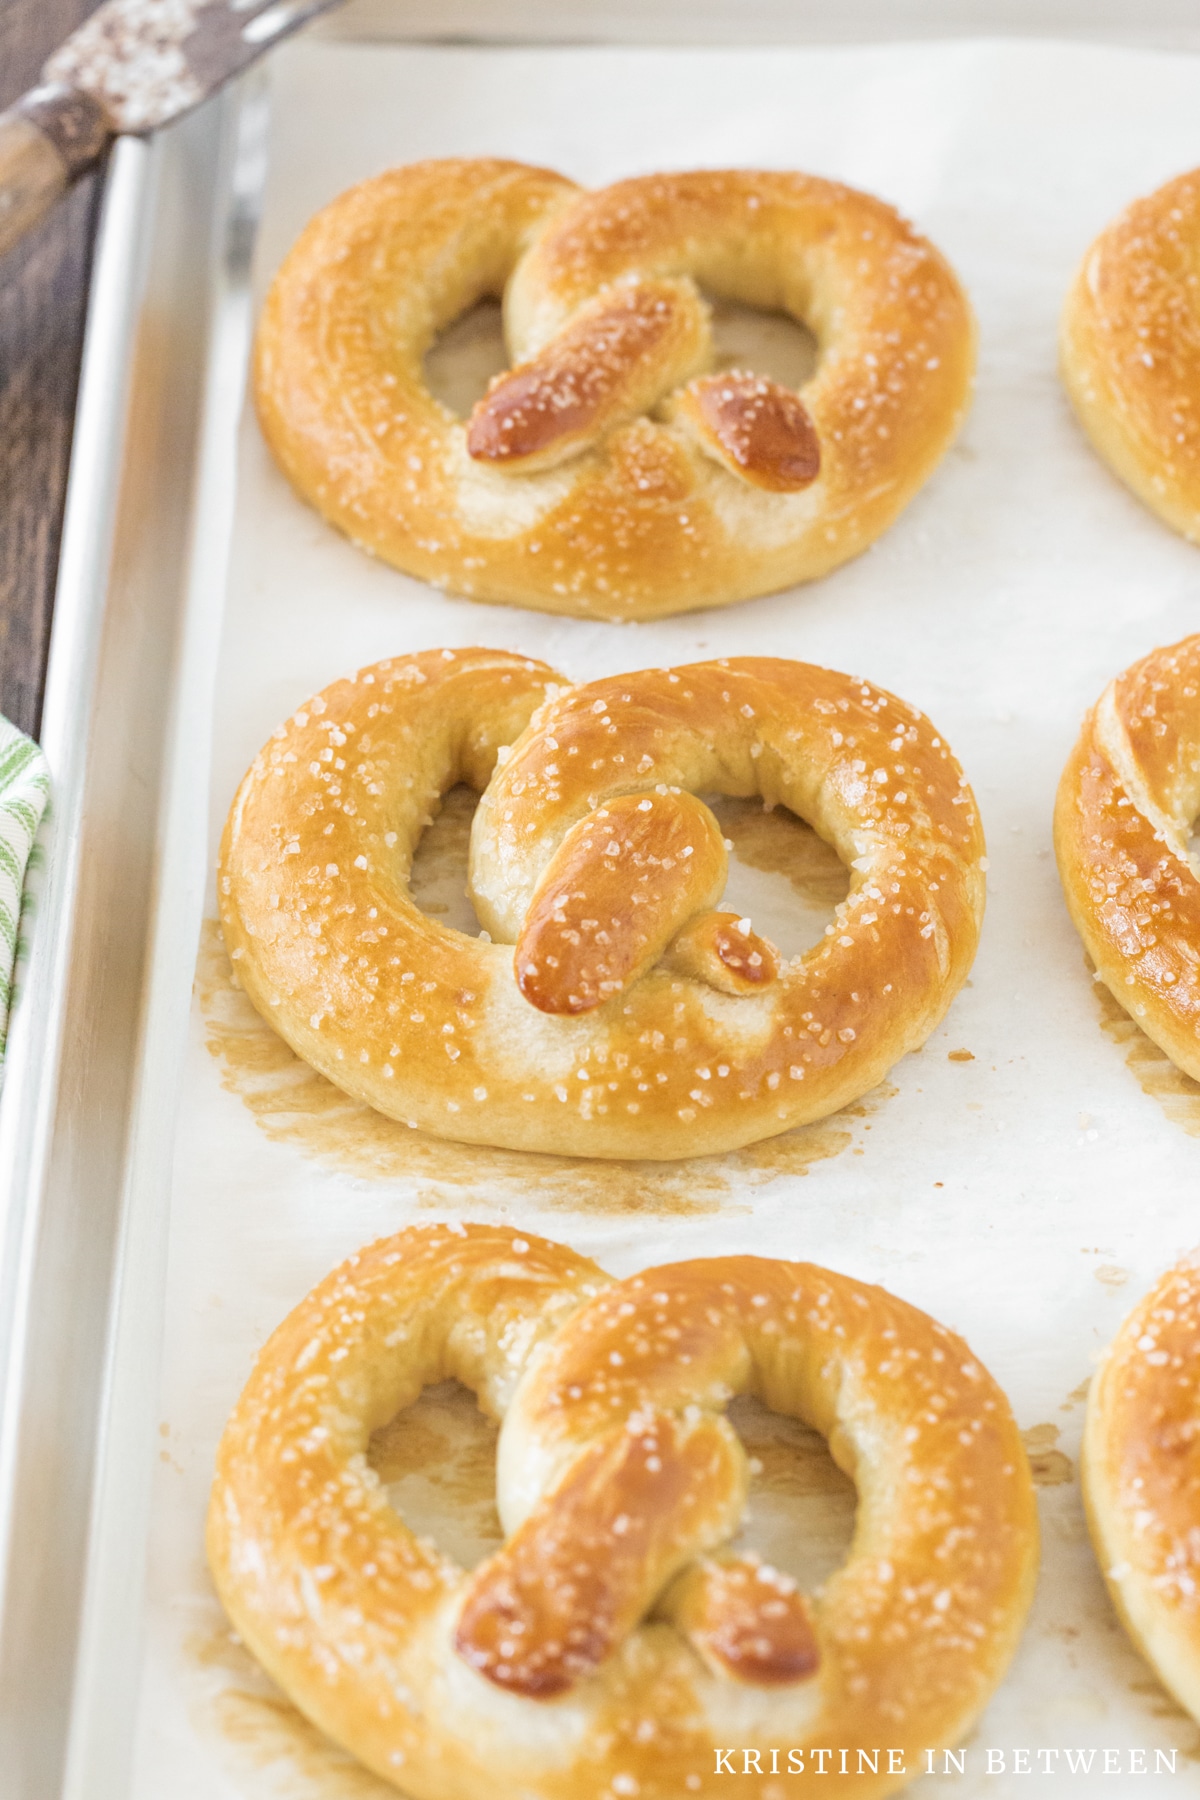 A tray of soft, salted pretzels with a green striped napkin sitting next to them.